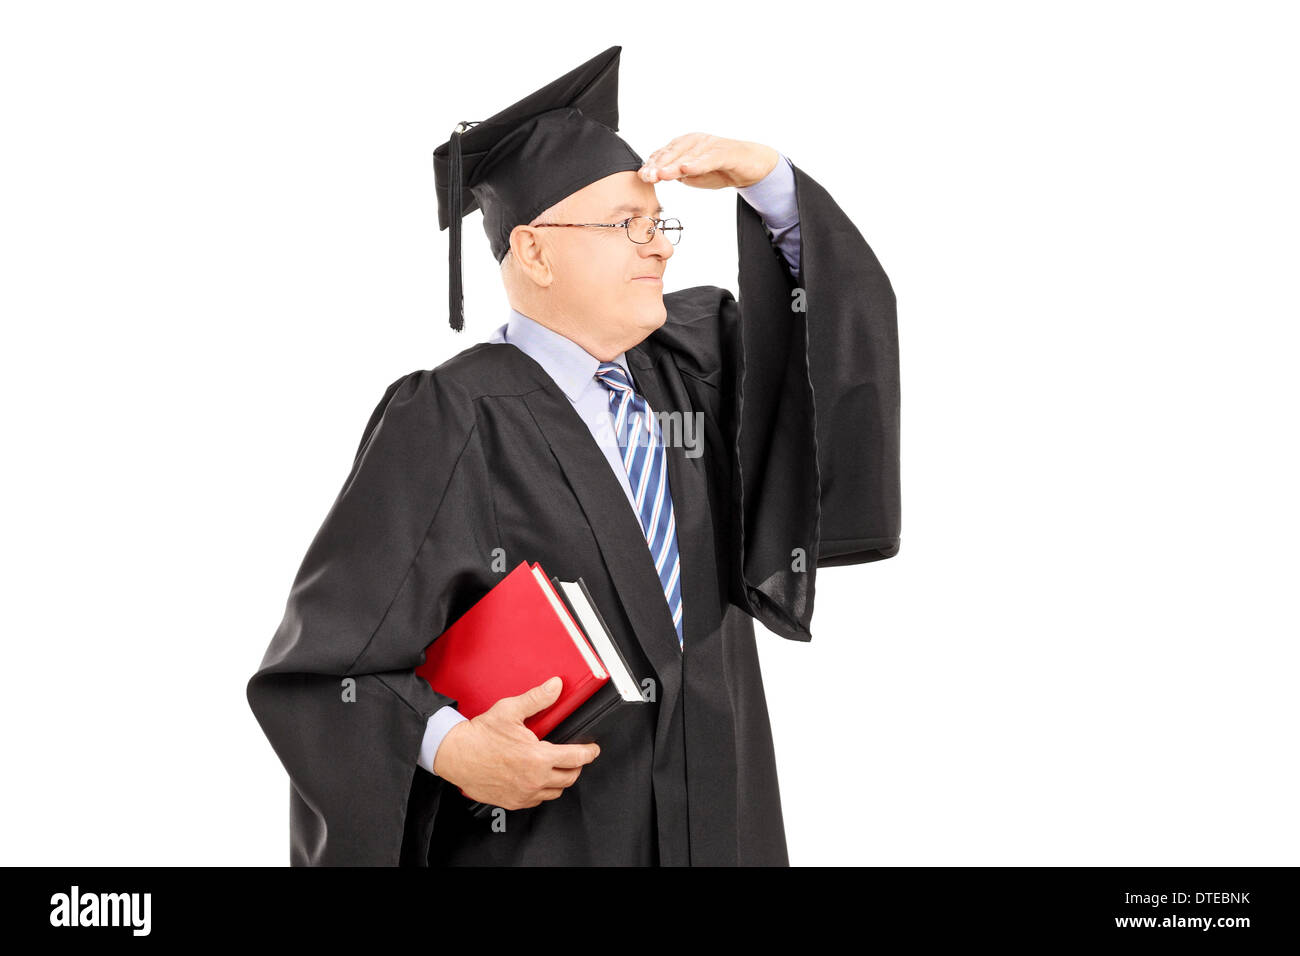 Male College Professor In Graduation Gown Looking With Hand Over ...